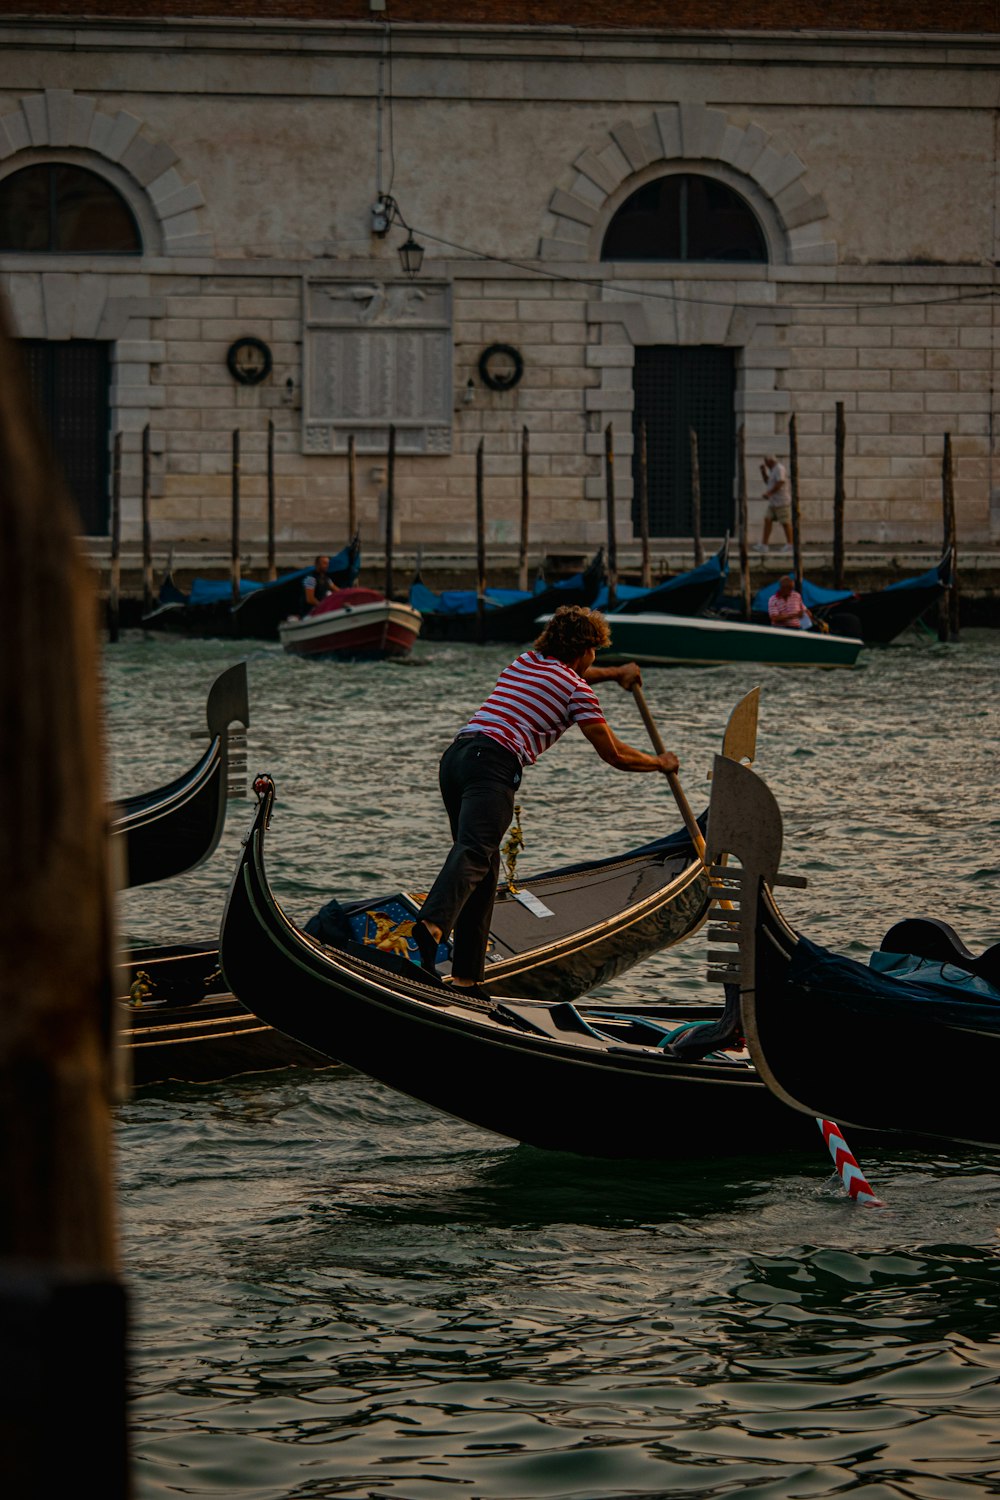 a person riding a gondola on a body of water